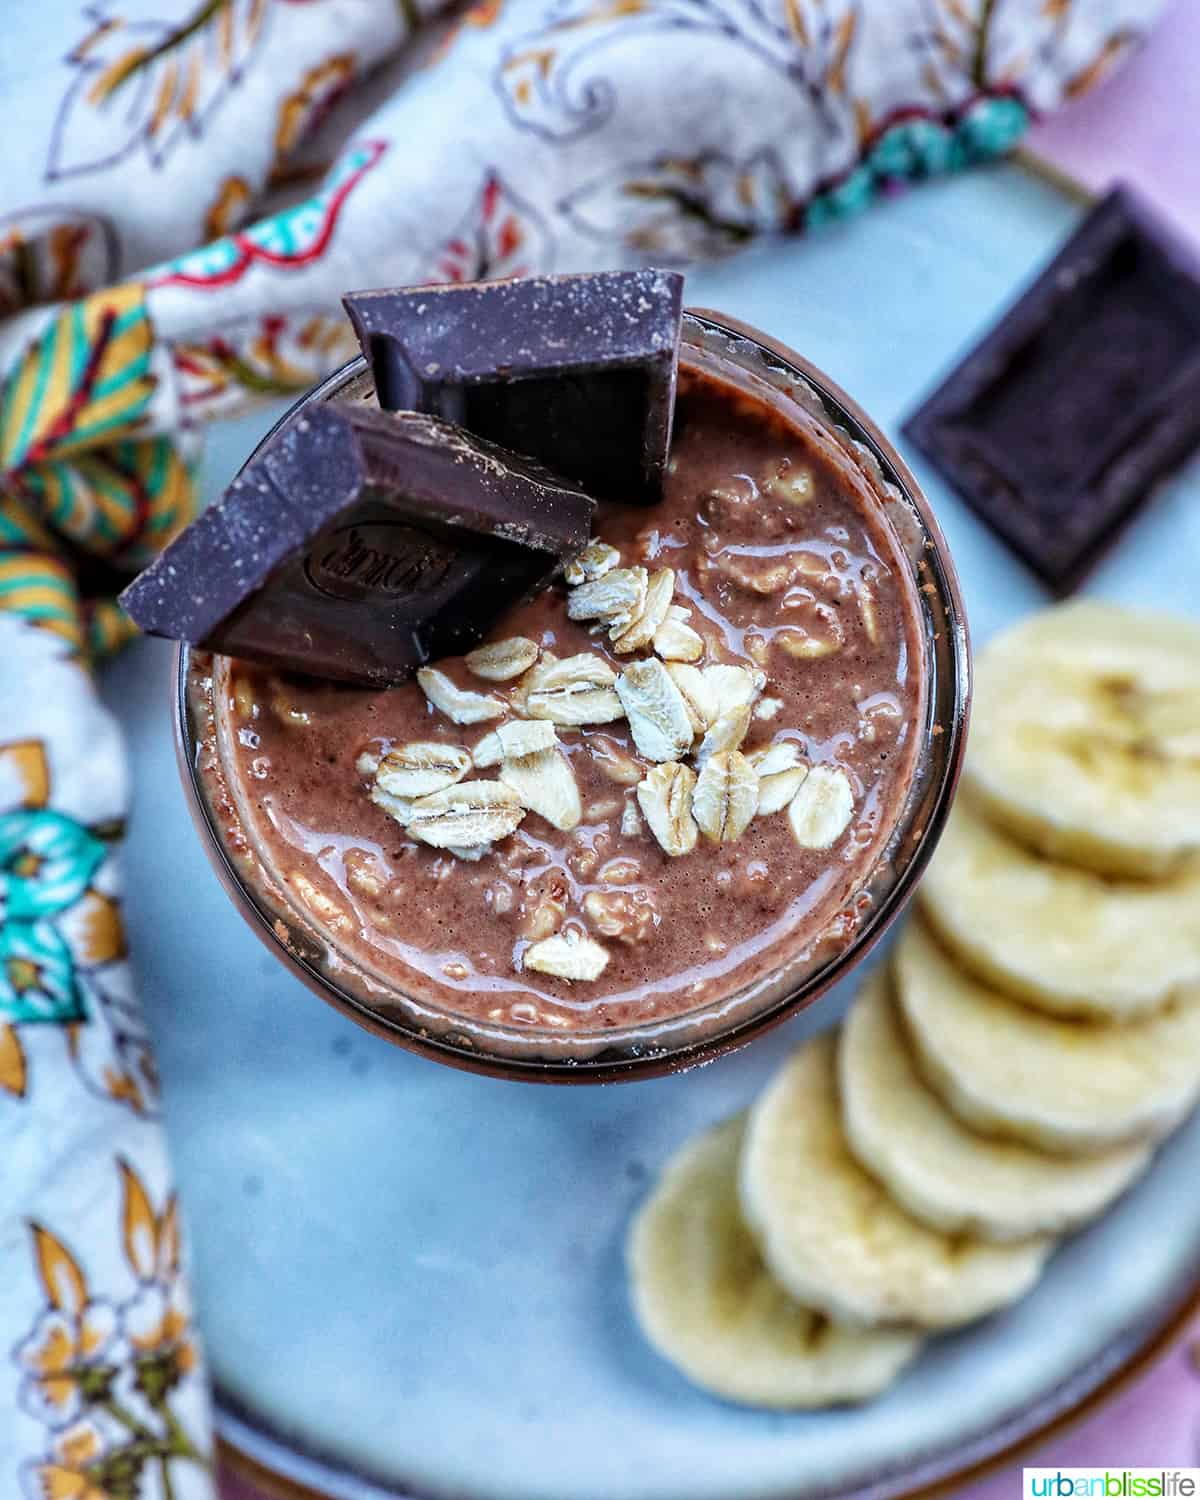 chocolate protein overnight oats topped with banana slices and chocolate pieces.